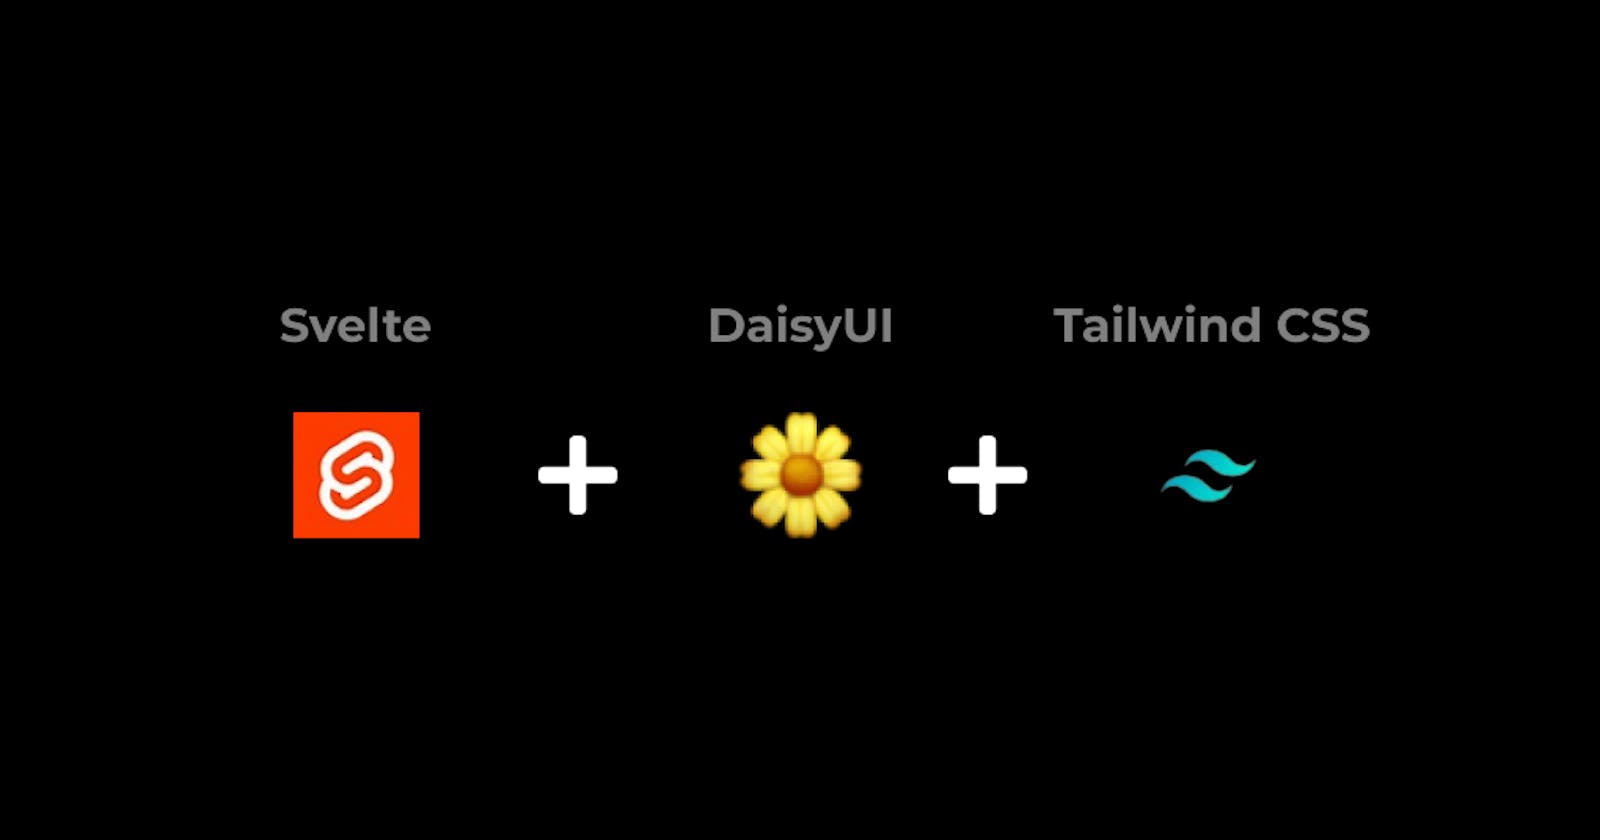 How to set up your own Svelte + TailwindCSS +DaisyUI development environment?